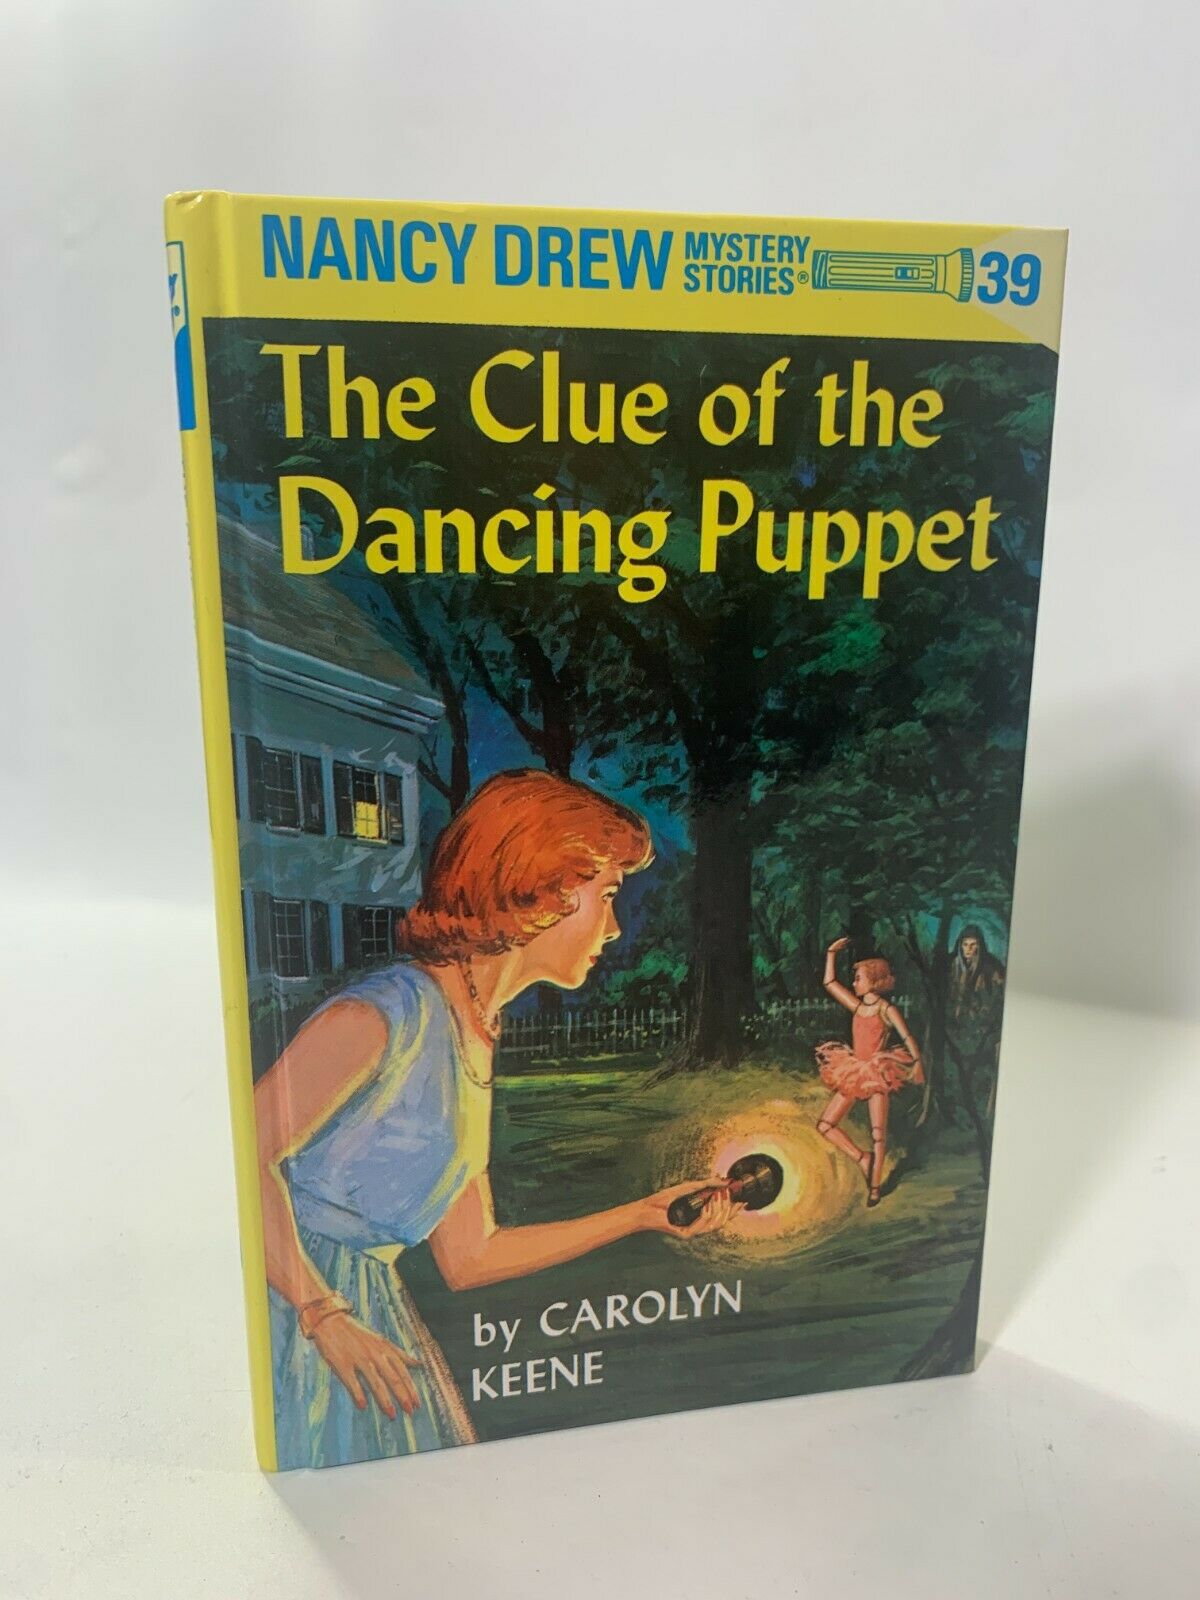 39. The Clue of the Dancing Puppet by Carolyn Keene [2000 · Nancy Drew]